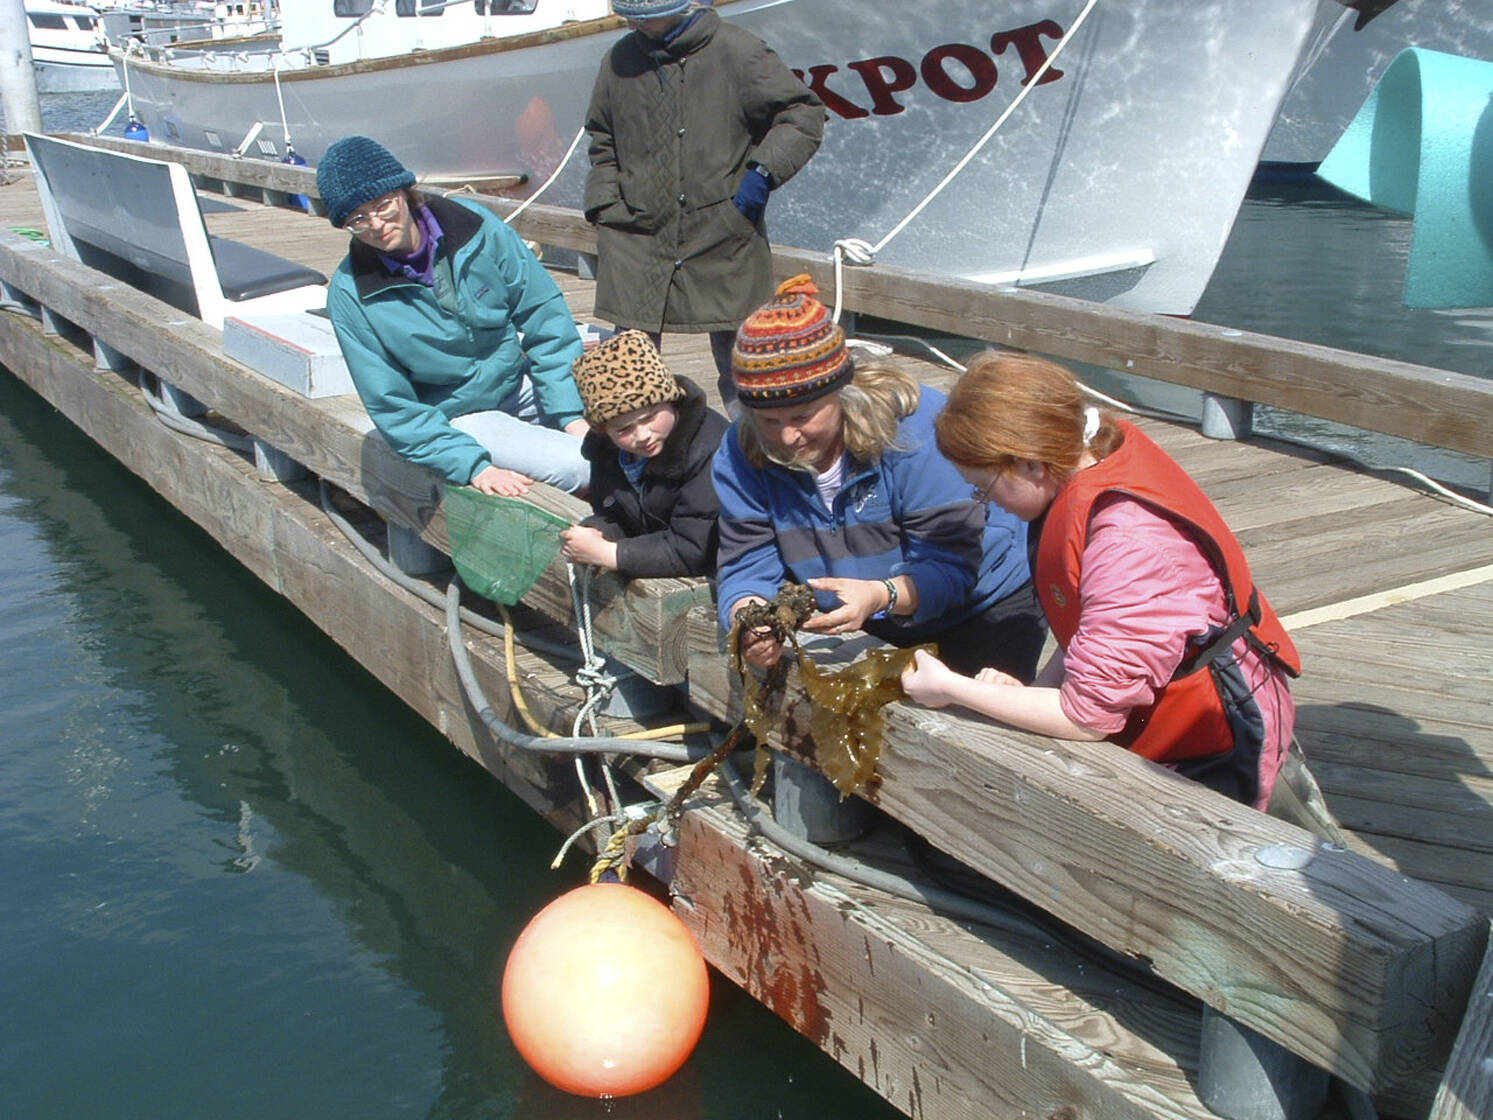 Lori Holcomb of Talkeetna and daughters Heather and Heidi are introduced to "Creatures of the Dock" during a Saturday tour led in May 2007 by Marilyn Sigman (center), director of Center for Alaskan Coastal Studies. (Courtesy photo/Center for Alaskan Coastal Studies)